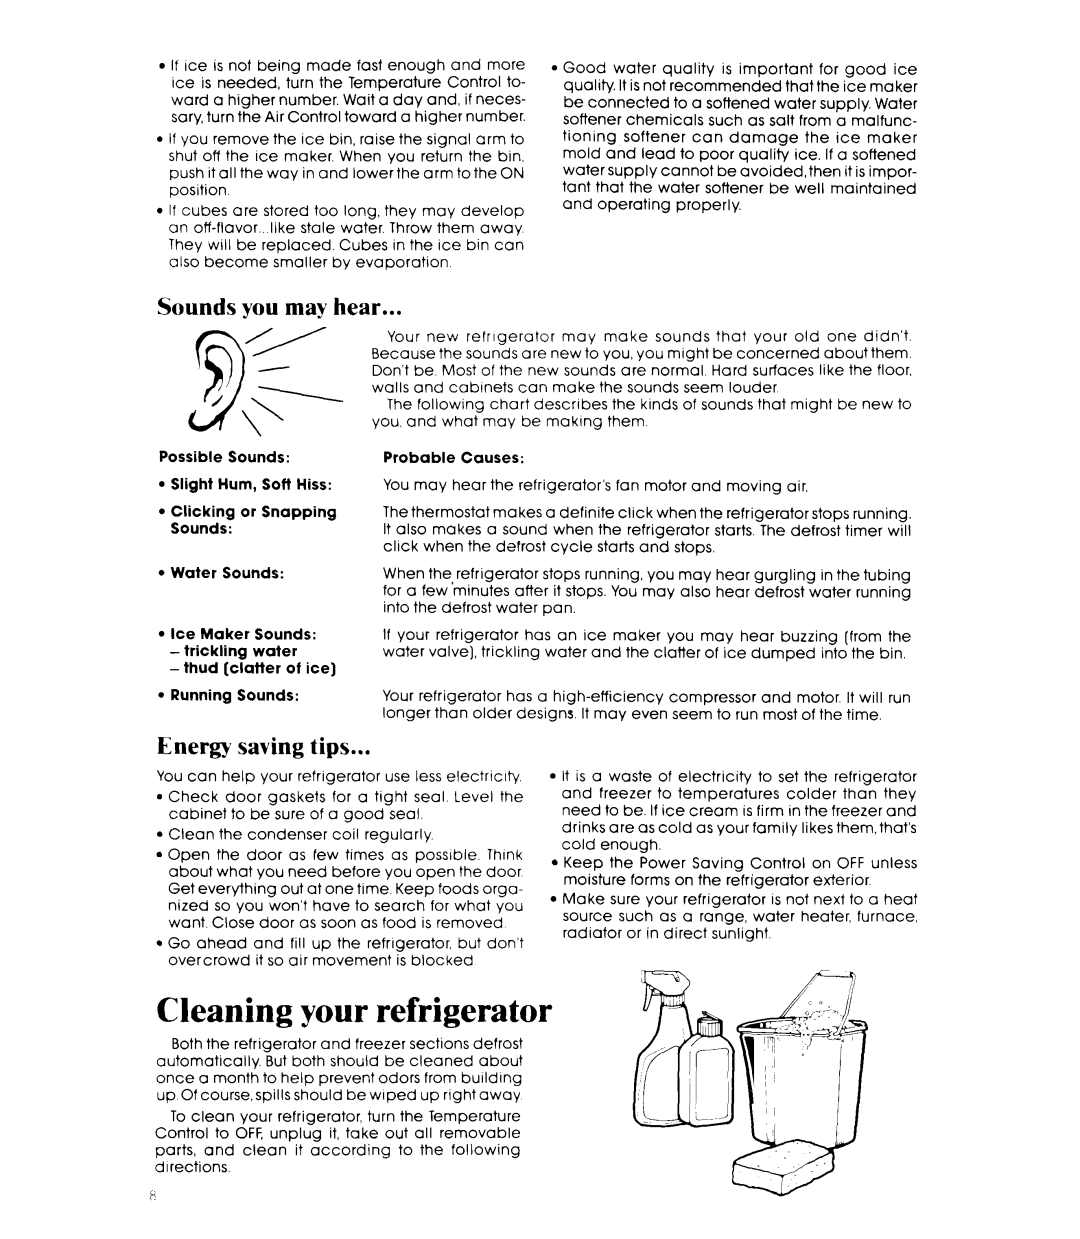 Whirlpool EDI9SK manual Cleaning your refrigerator, Sounds you may hear, Energy saving tips 